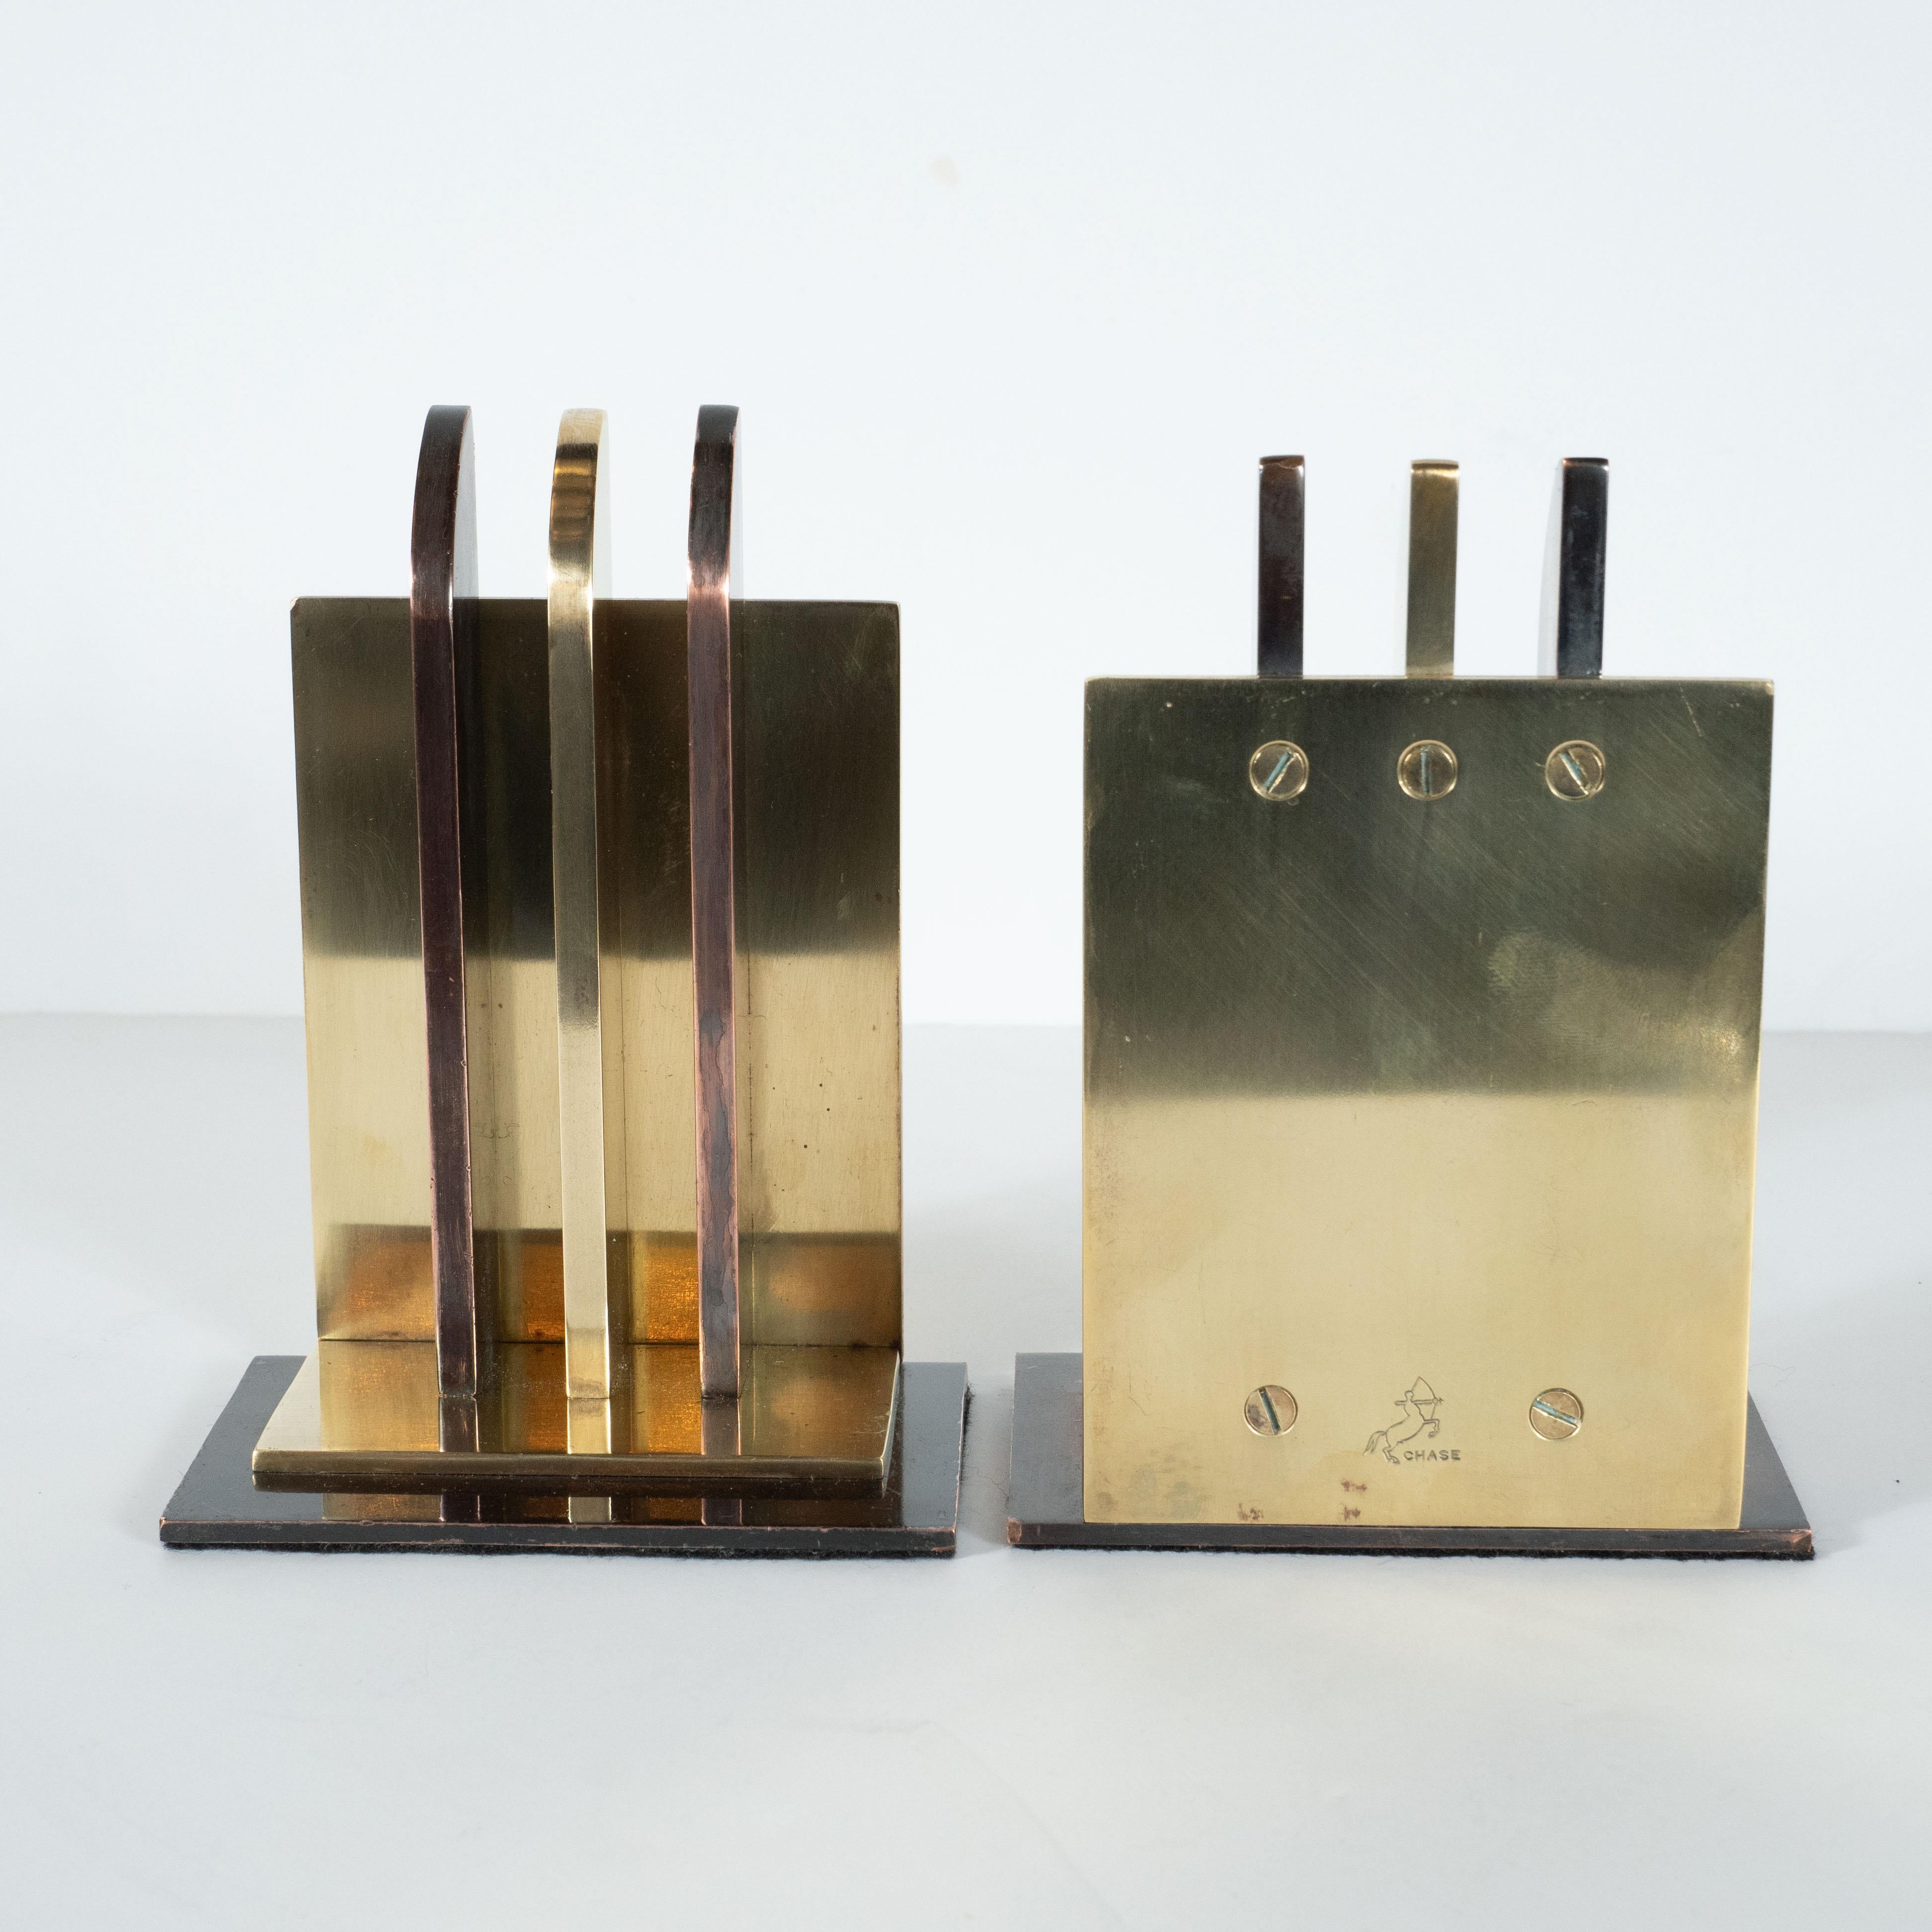 American Art Deco Streamlined Copper & Brass Bookends by Walter Von Nessen for Chase Co.